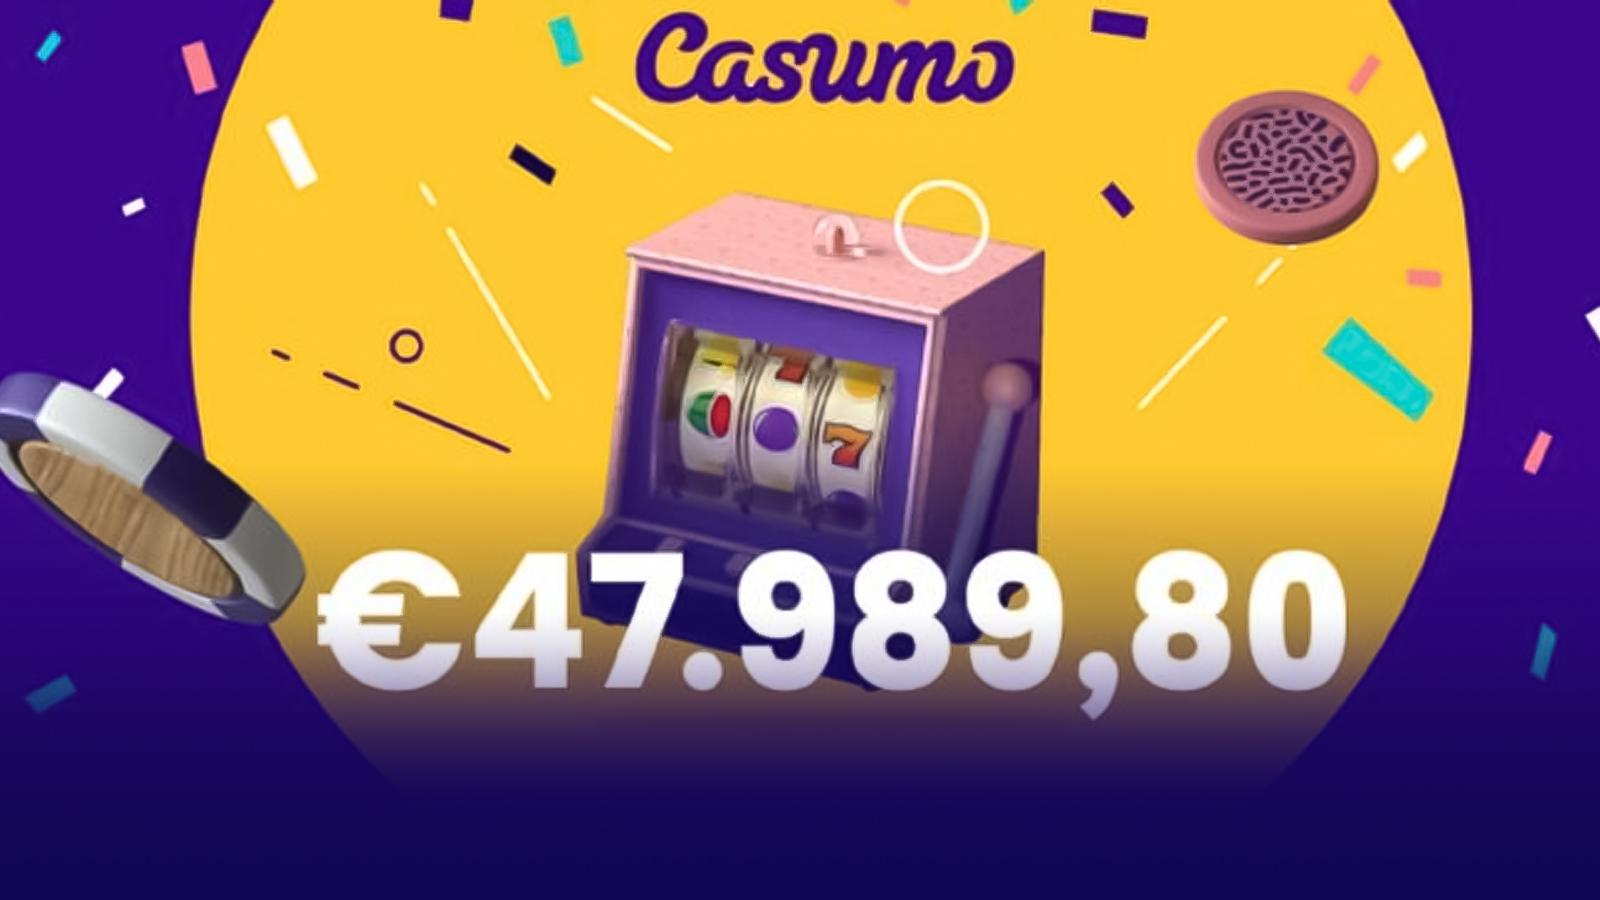 Play games with jackpots and try to win a part of a great prize at Casumo Casino.